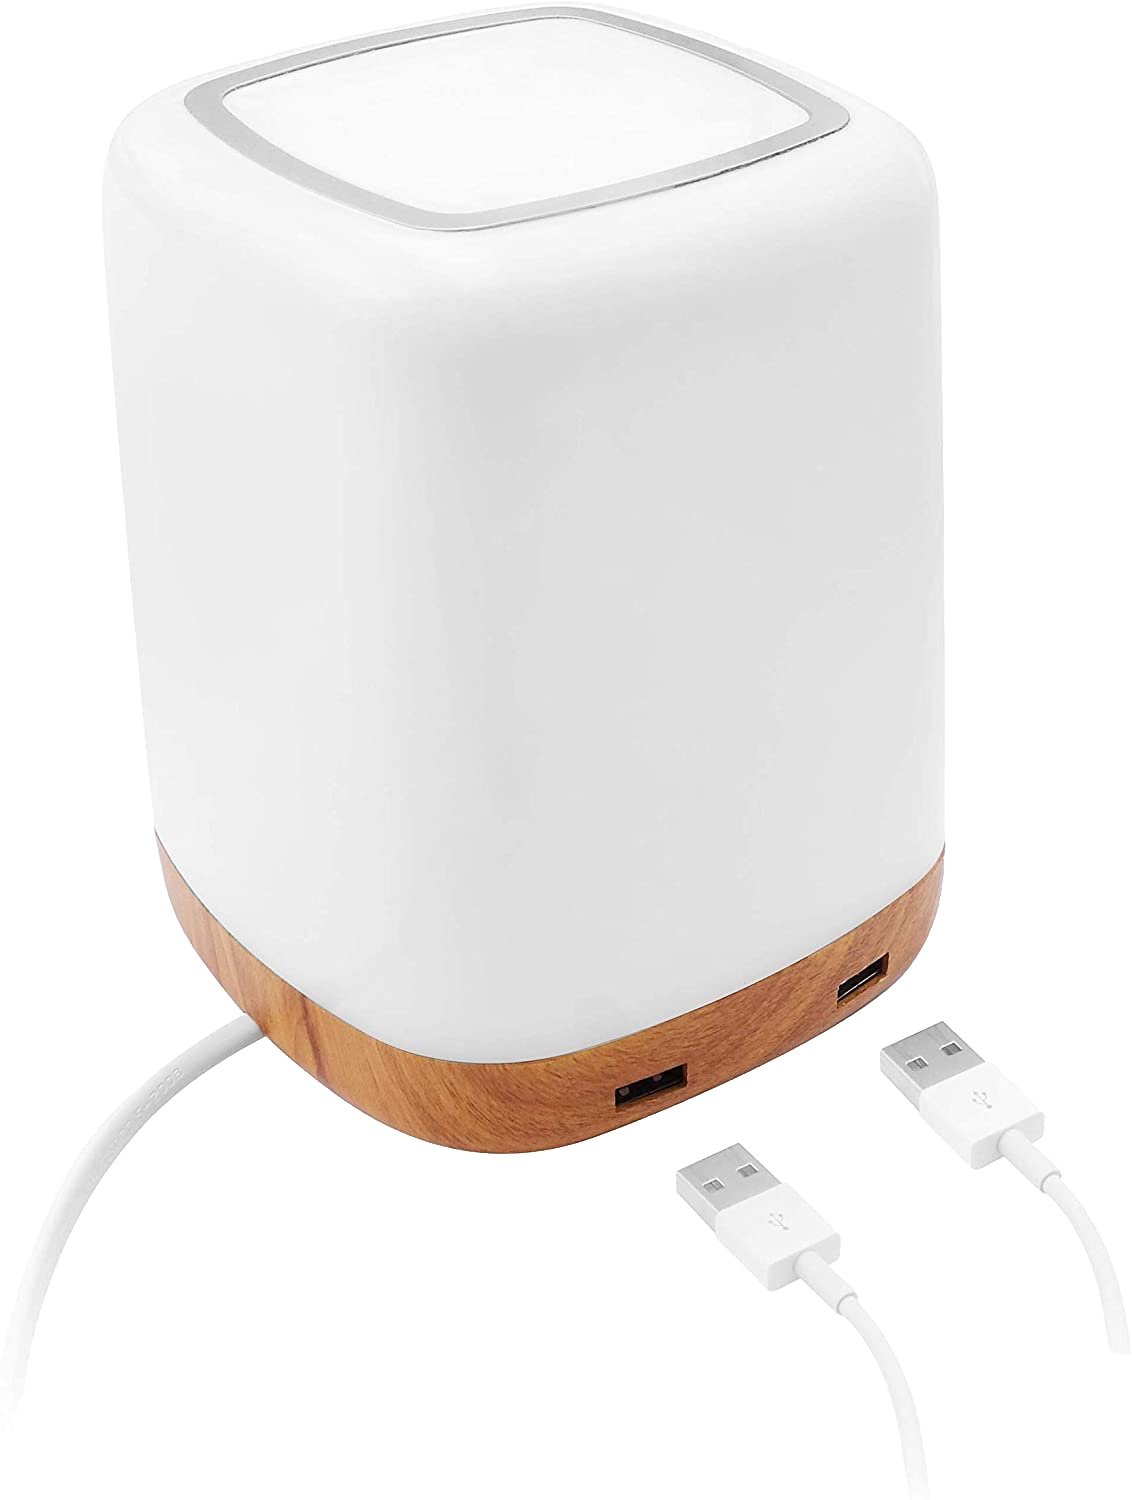 Macally Led Light Usb Charger Cropped Render